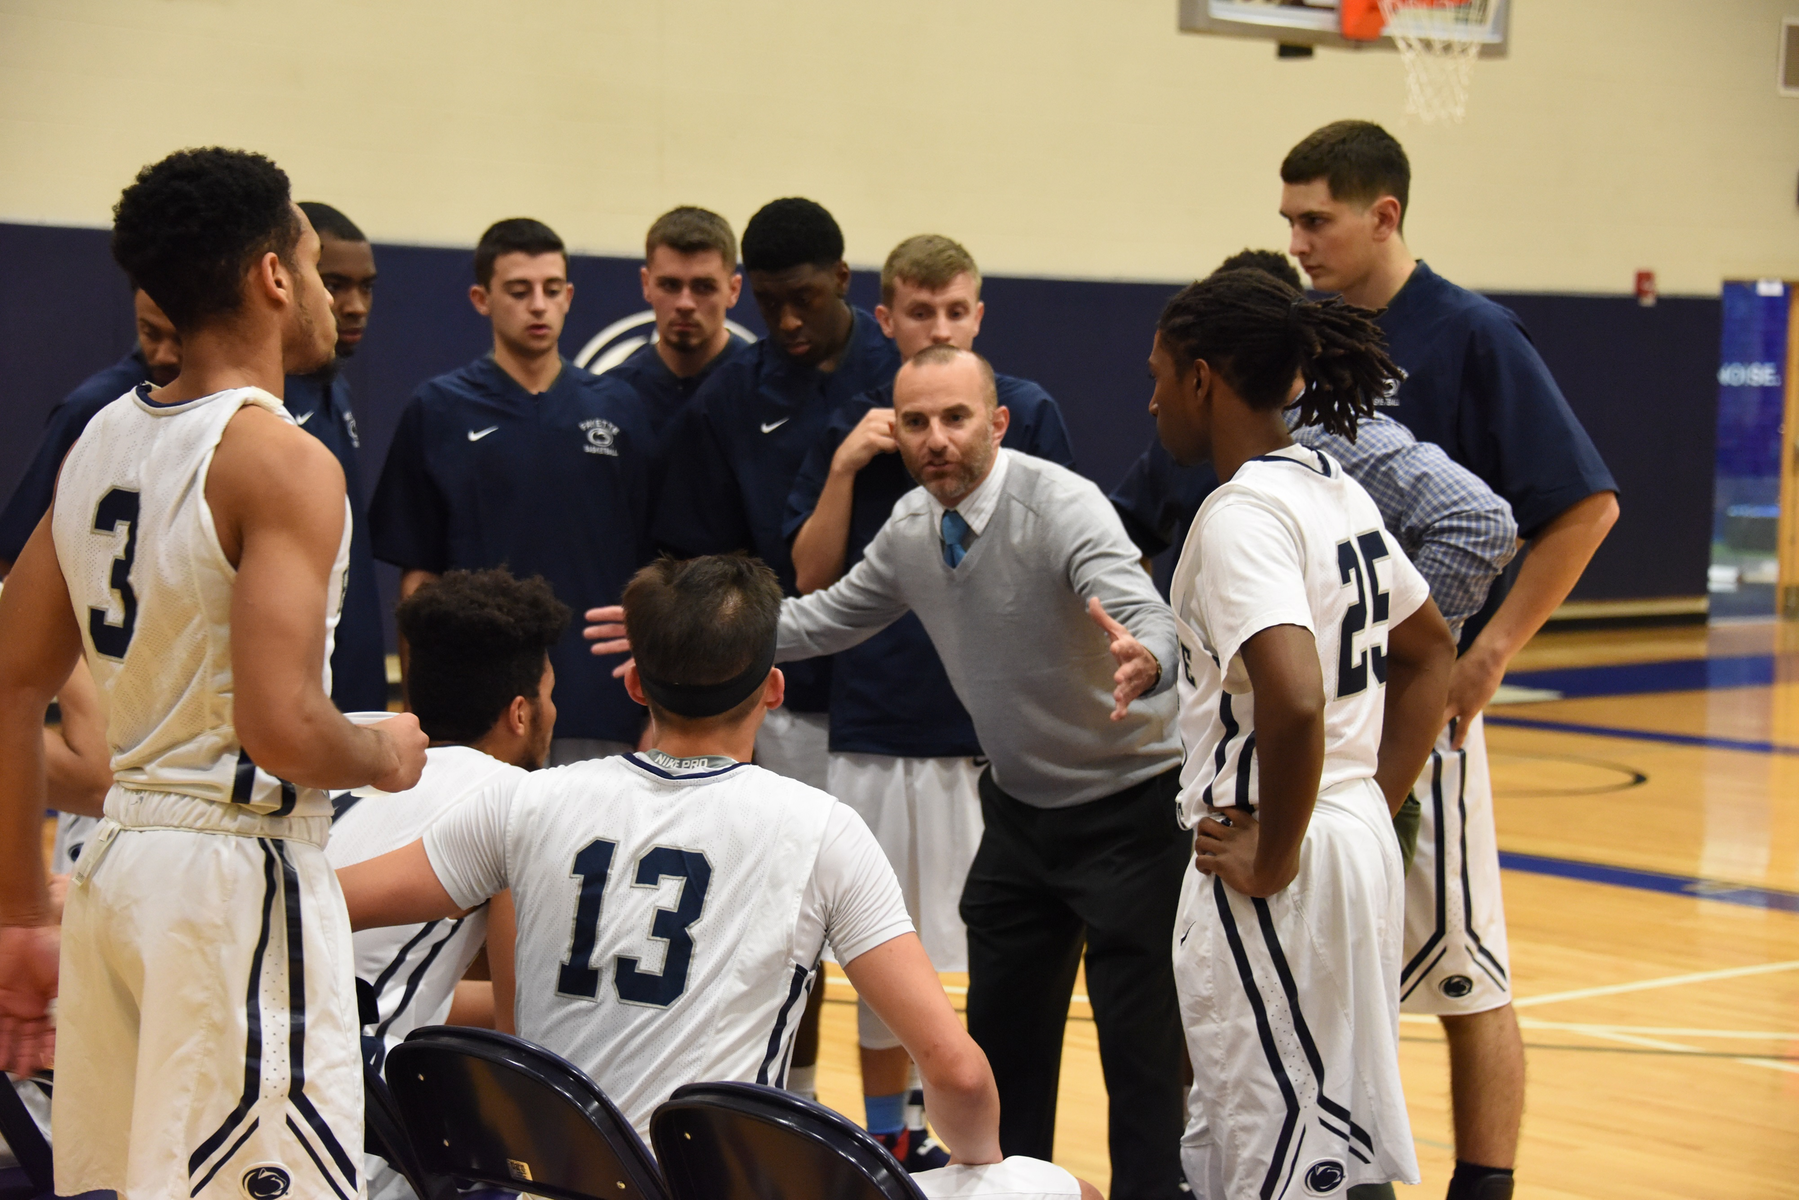 Men's Basketball split their games over the weekend